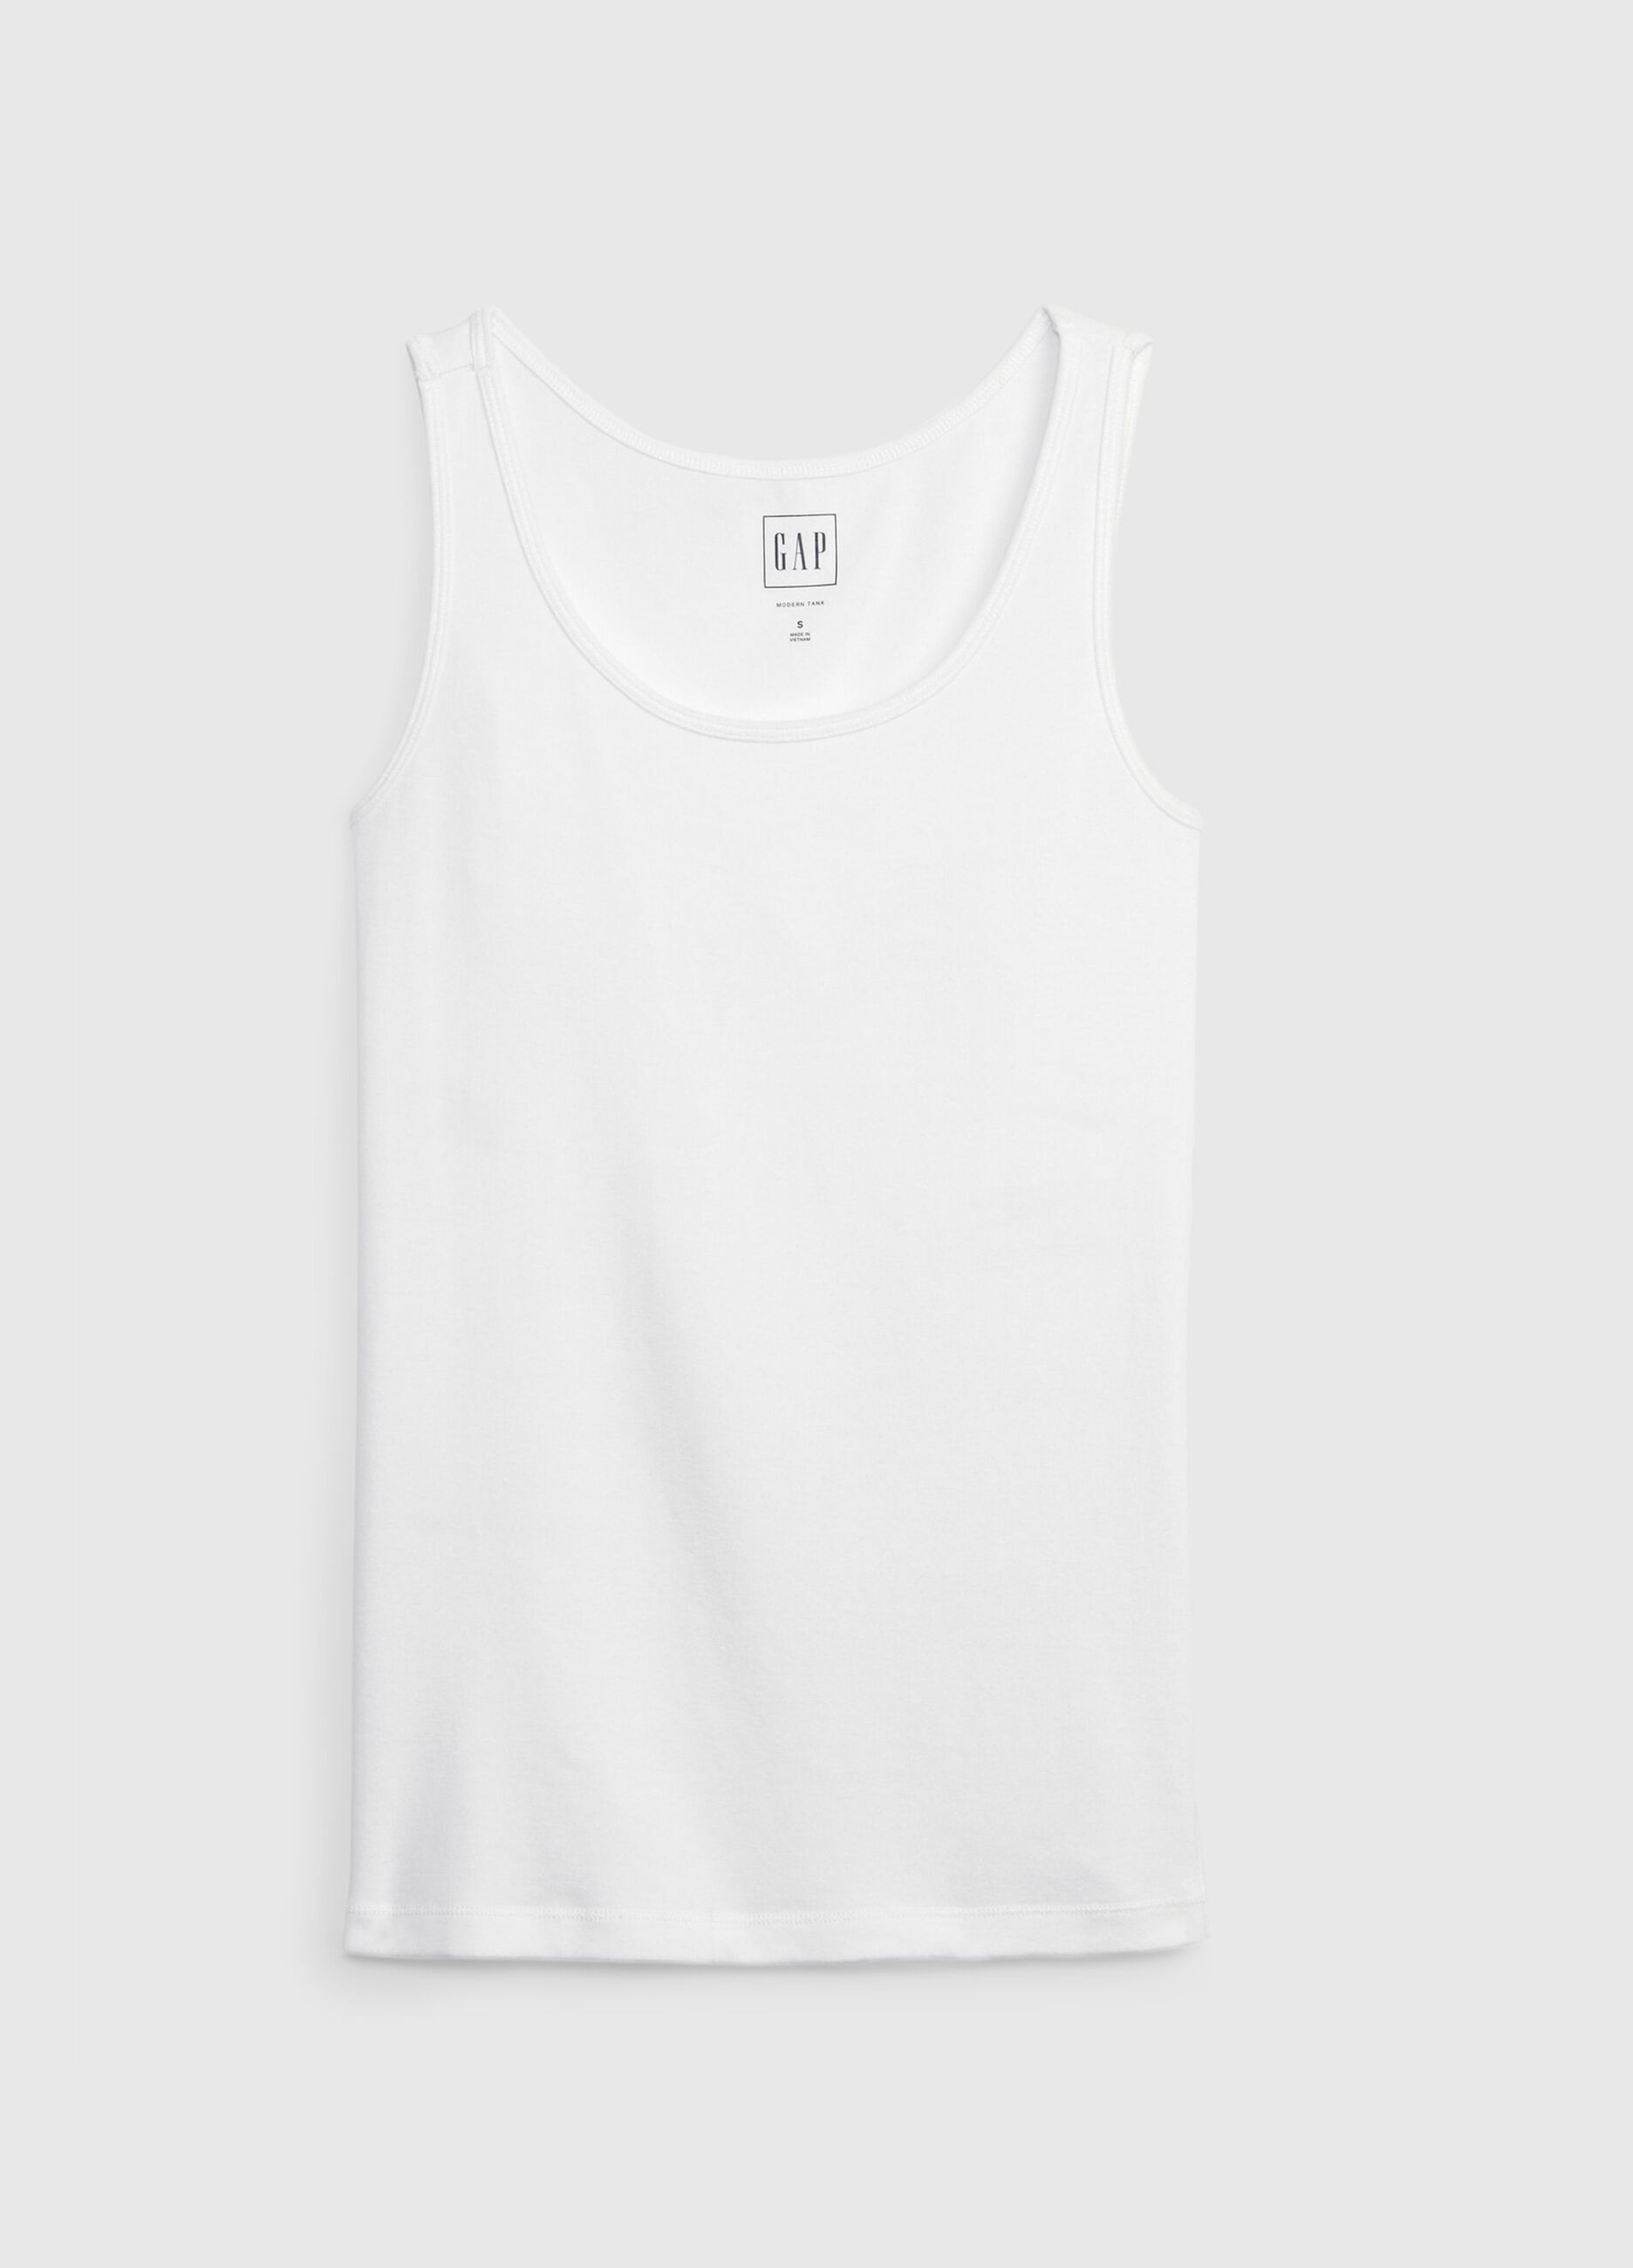 Tank top in cotton and modal.